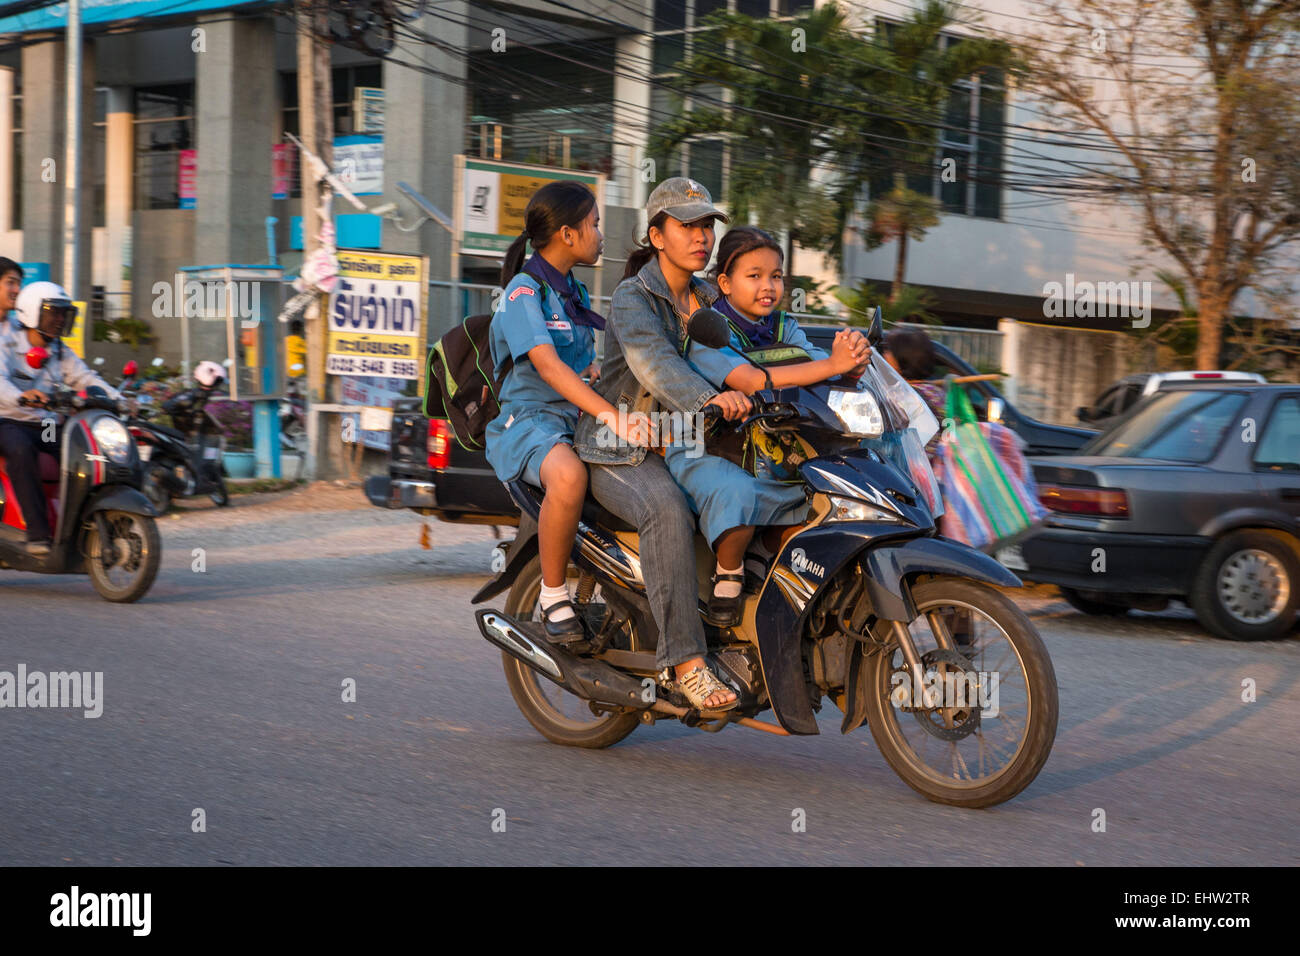 DAILY LIFE IN THAILAND, SOUTHEAST ASIA Stock Photo